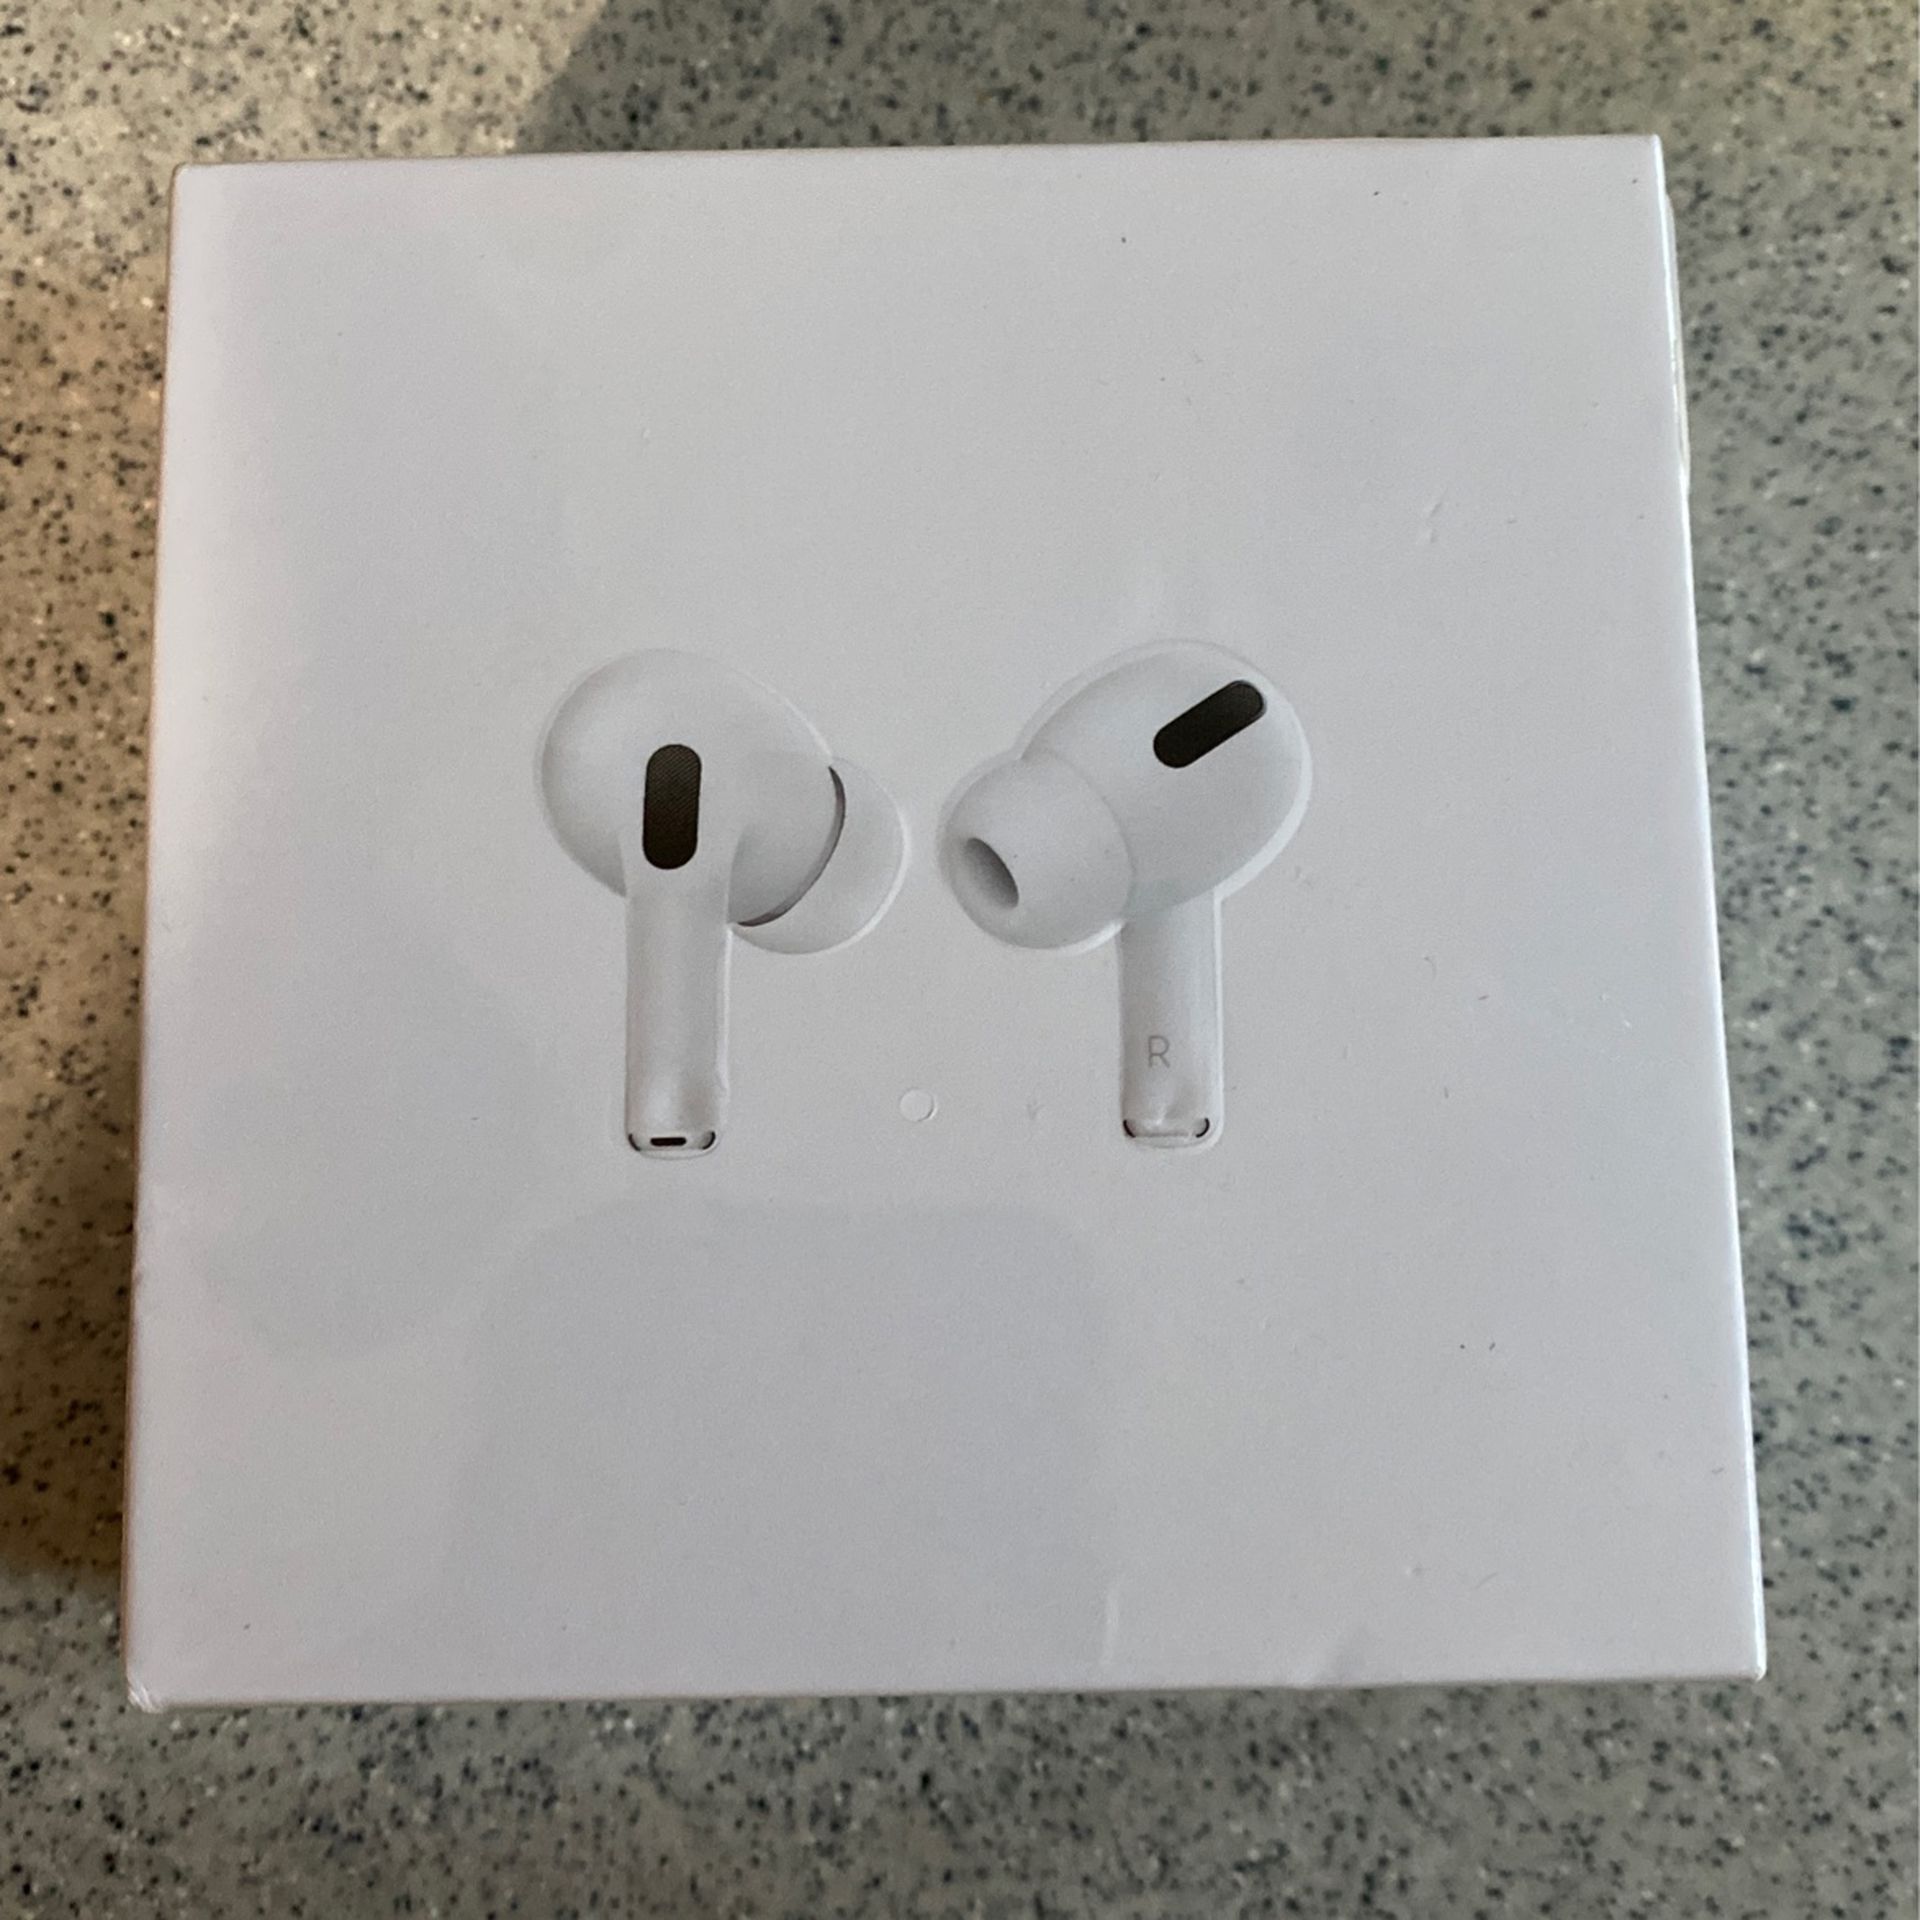 AirPods Pro Wireless headphones with charging case,. Unopened in the box New $120